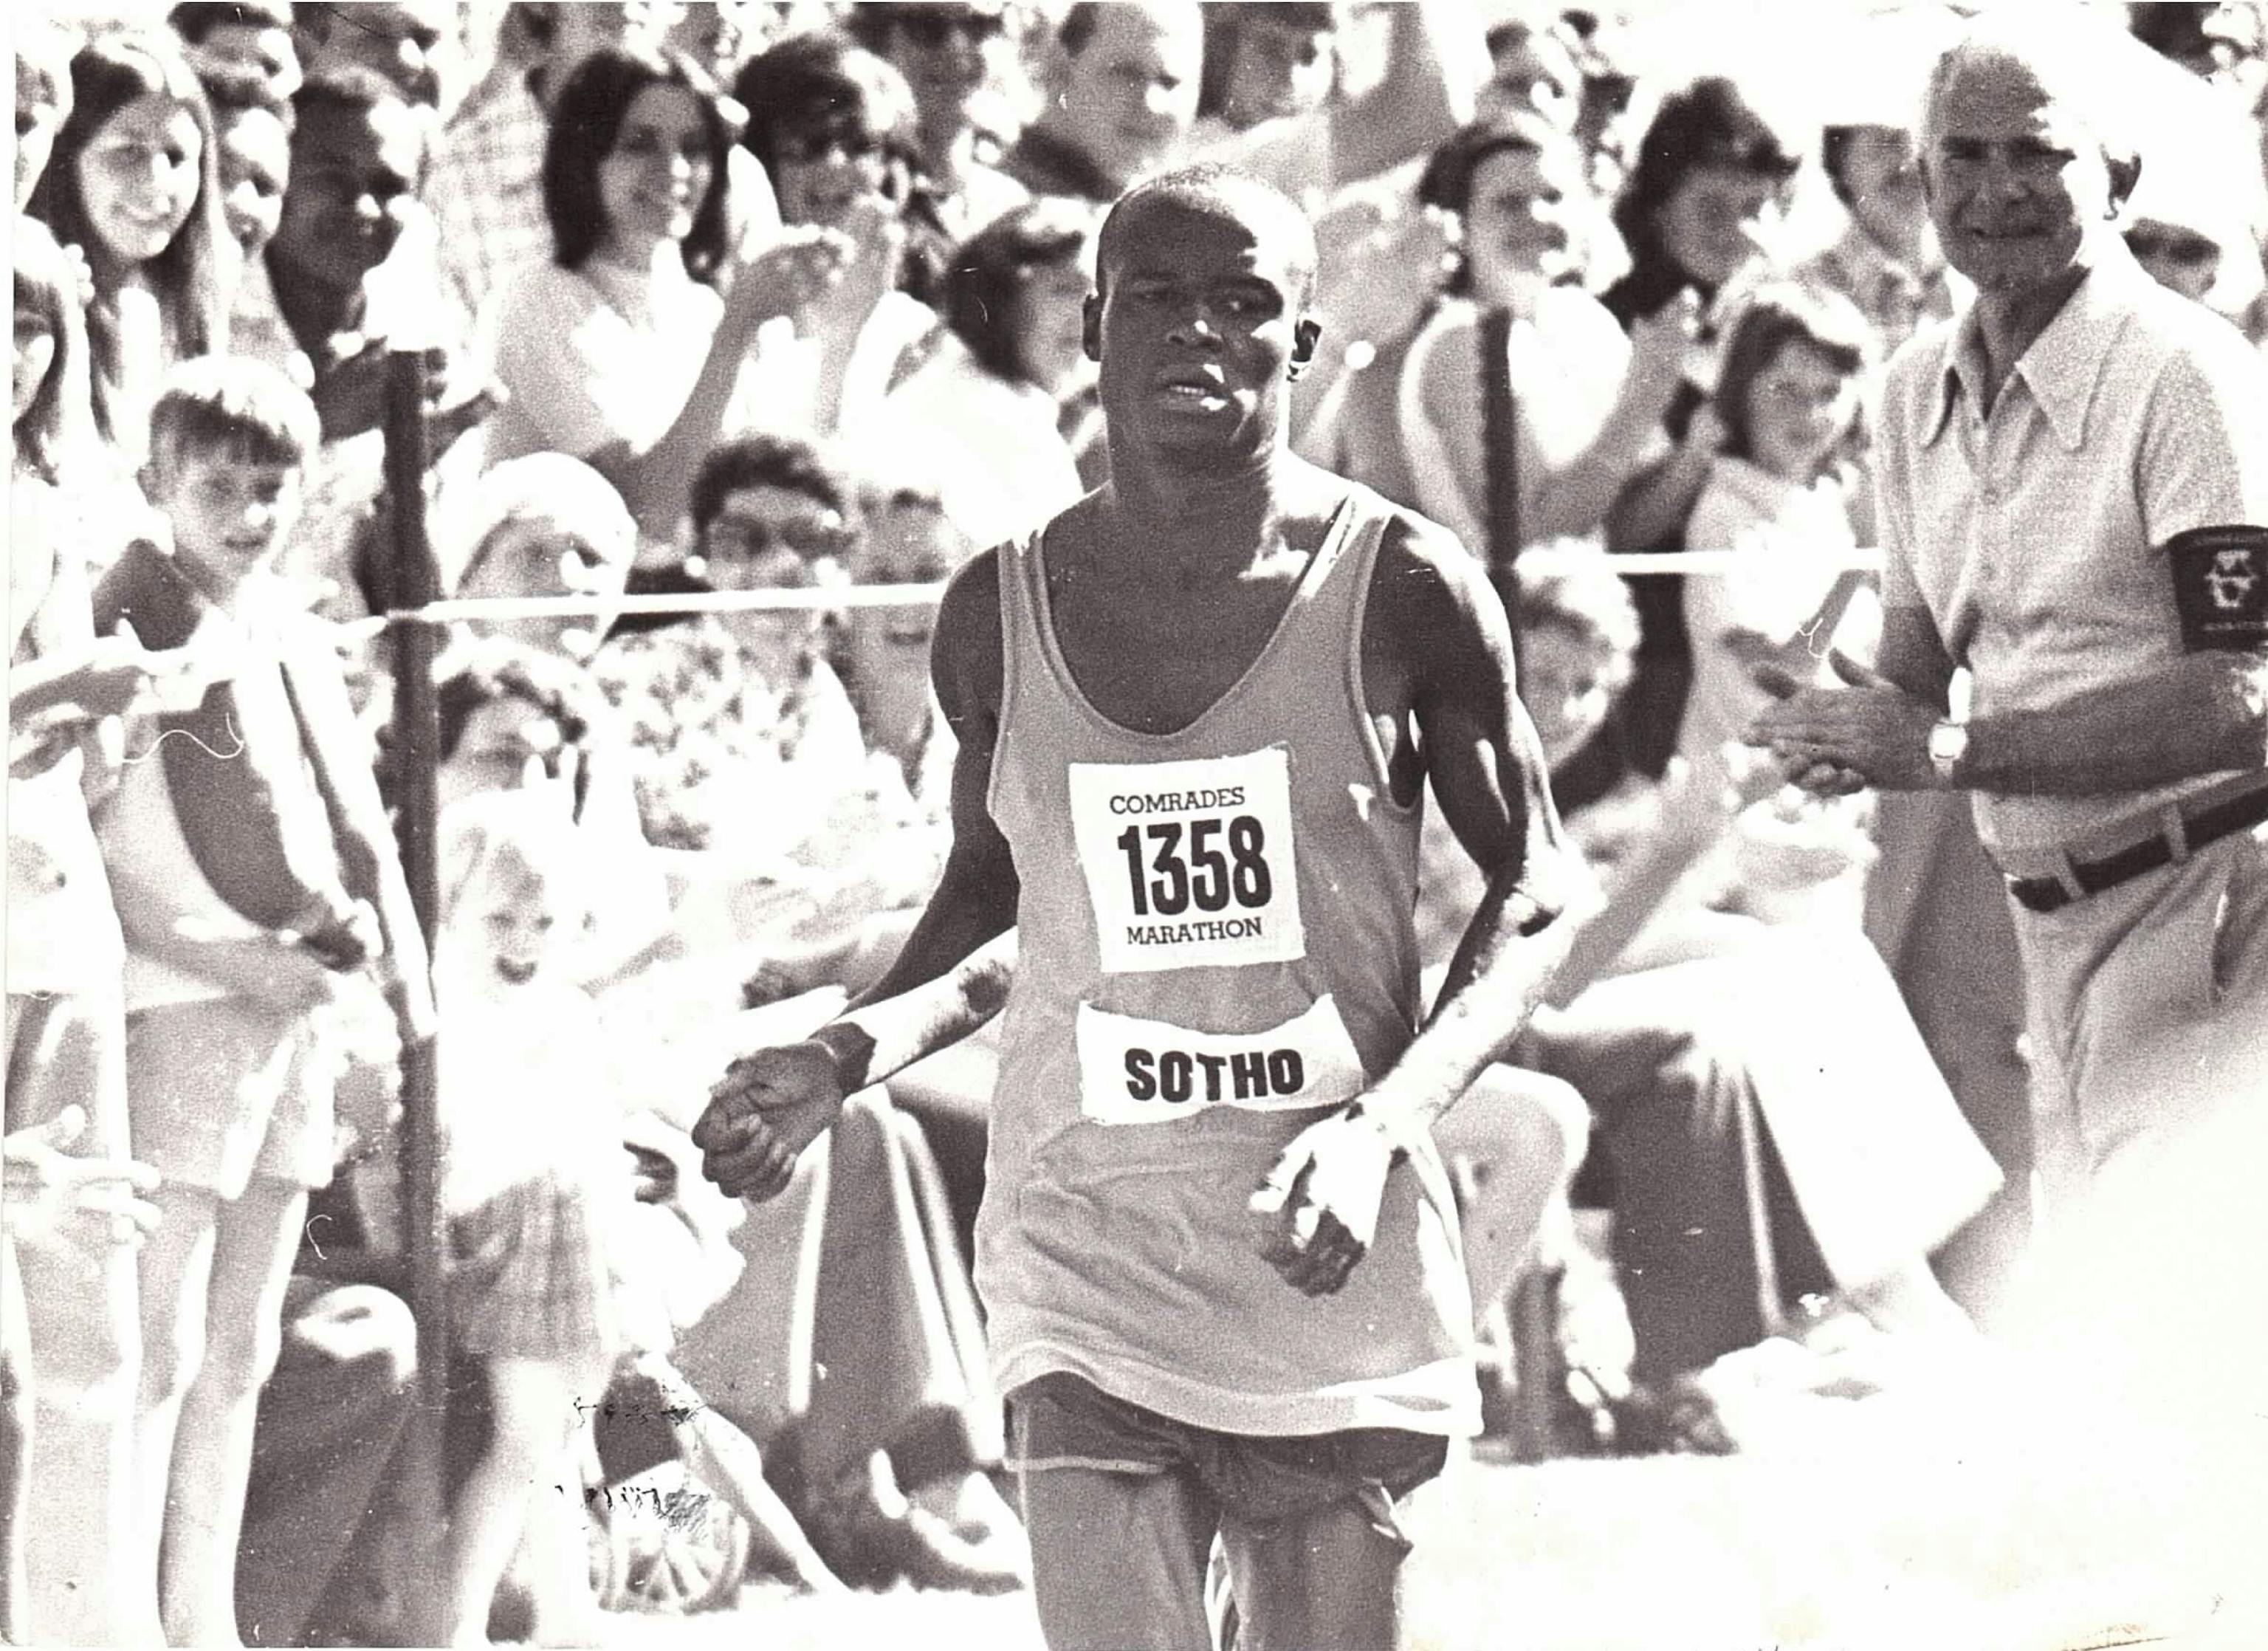 Vincent Gcabashe Rakabaele First Non White To Receive A Medal 1975 Also Past Winner Of Two Oceans Ultra Marathon